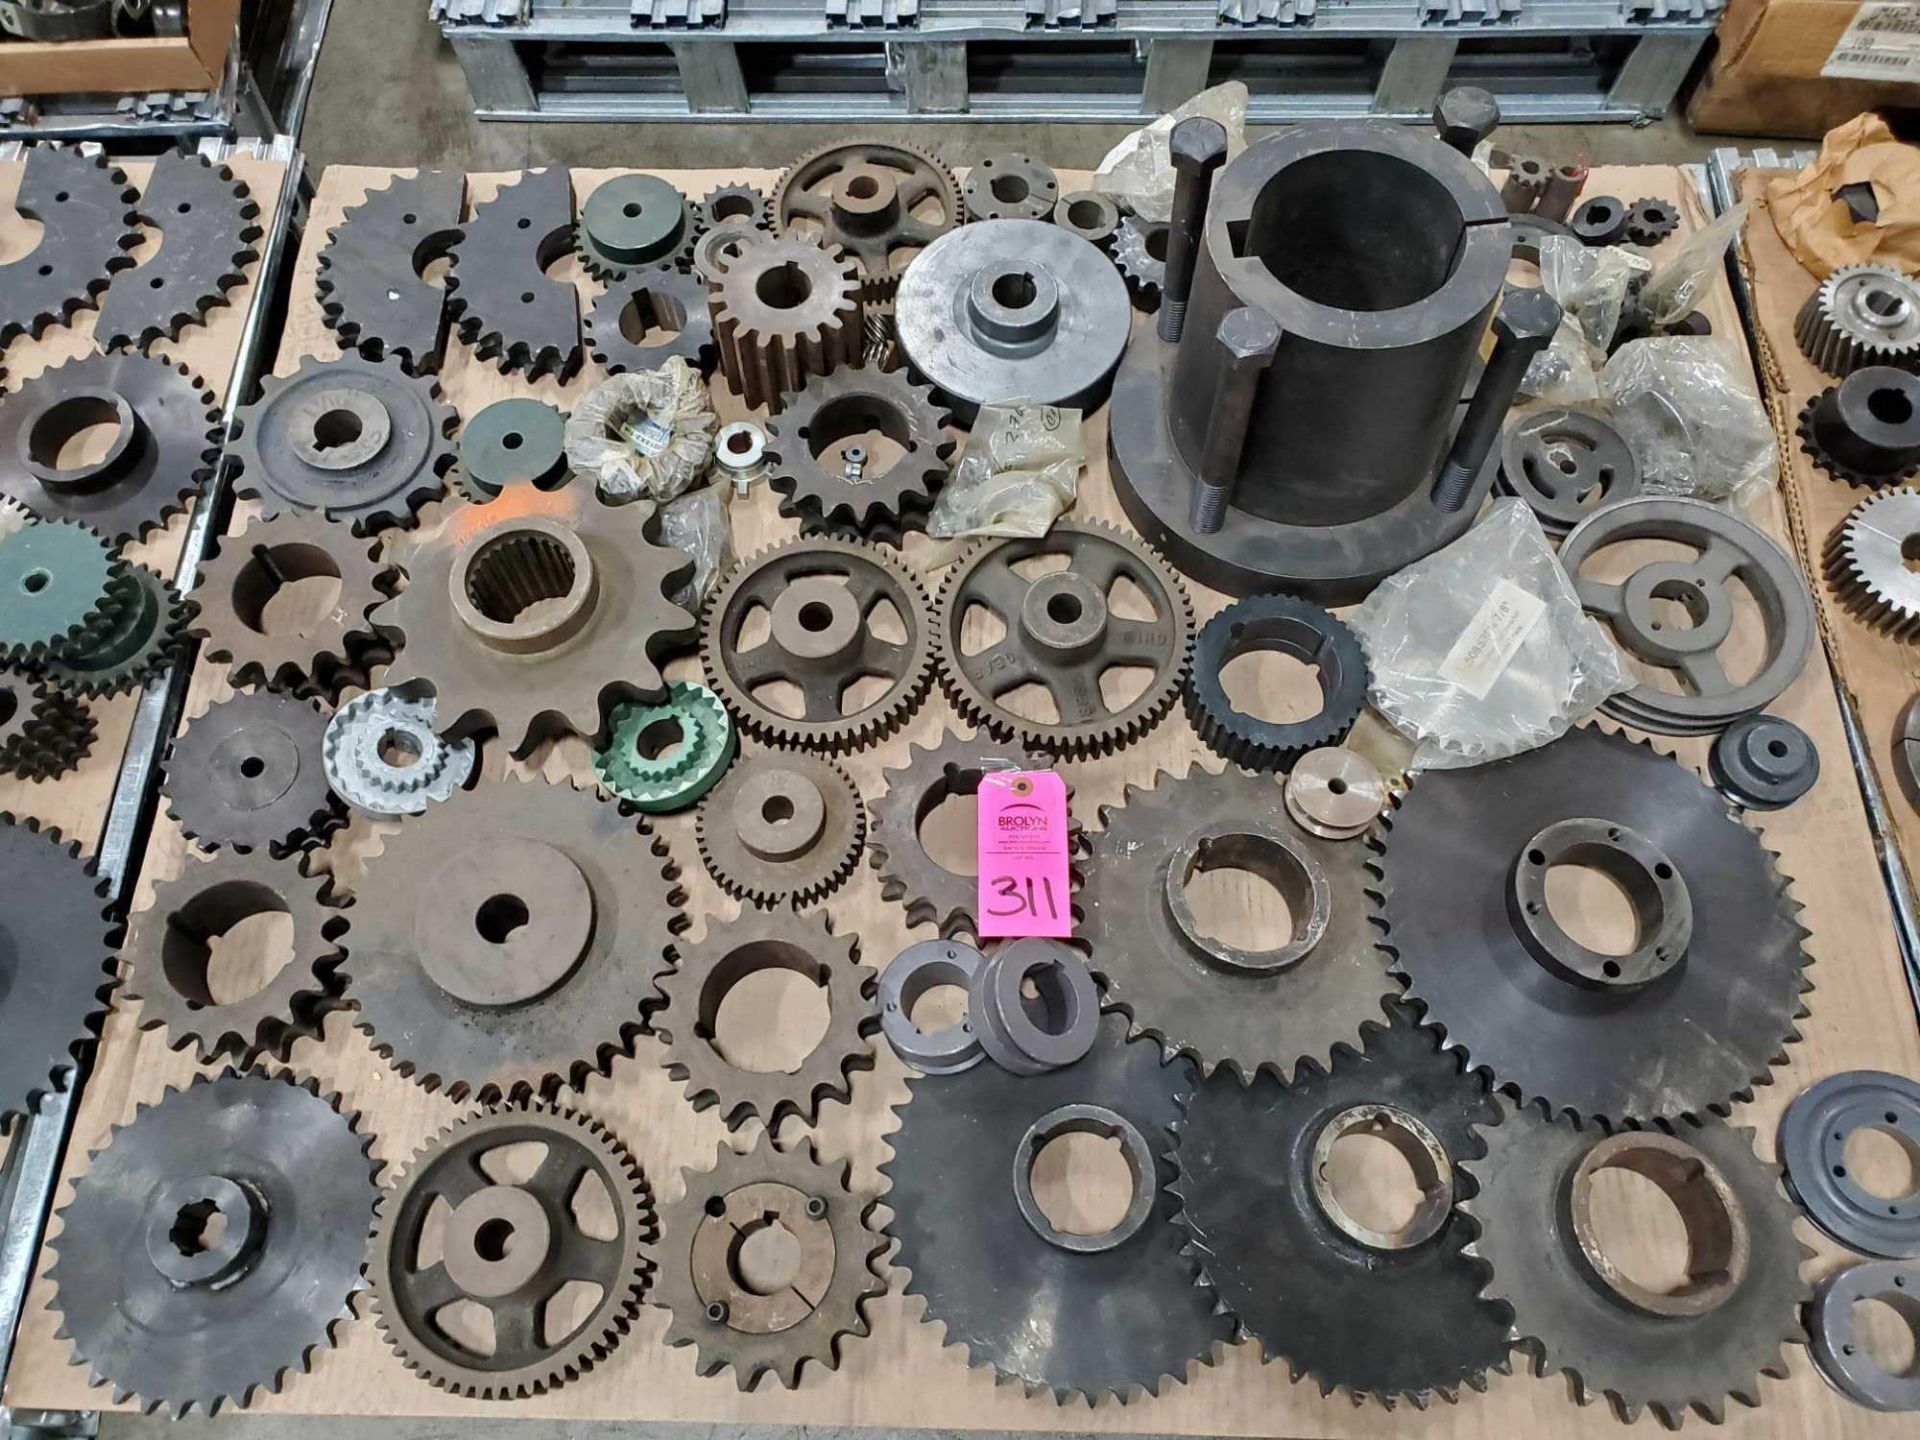 Pallet of assorted pulleys, sheaves, bushings etc. Most new as pictured.